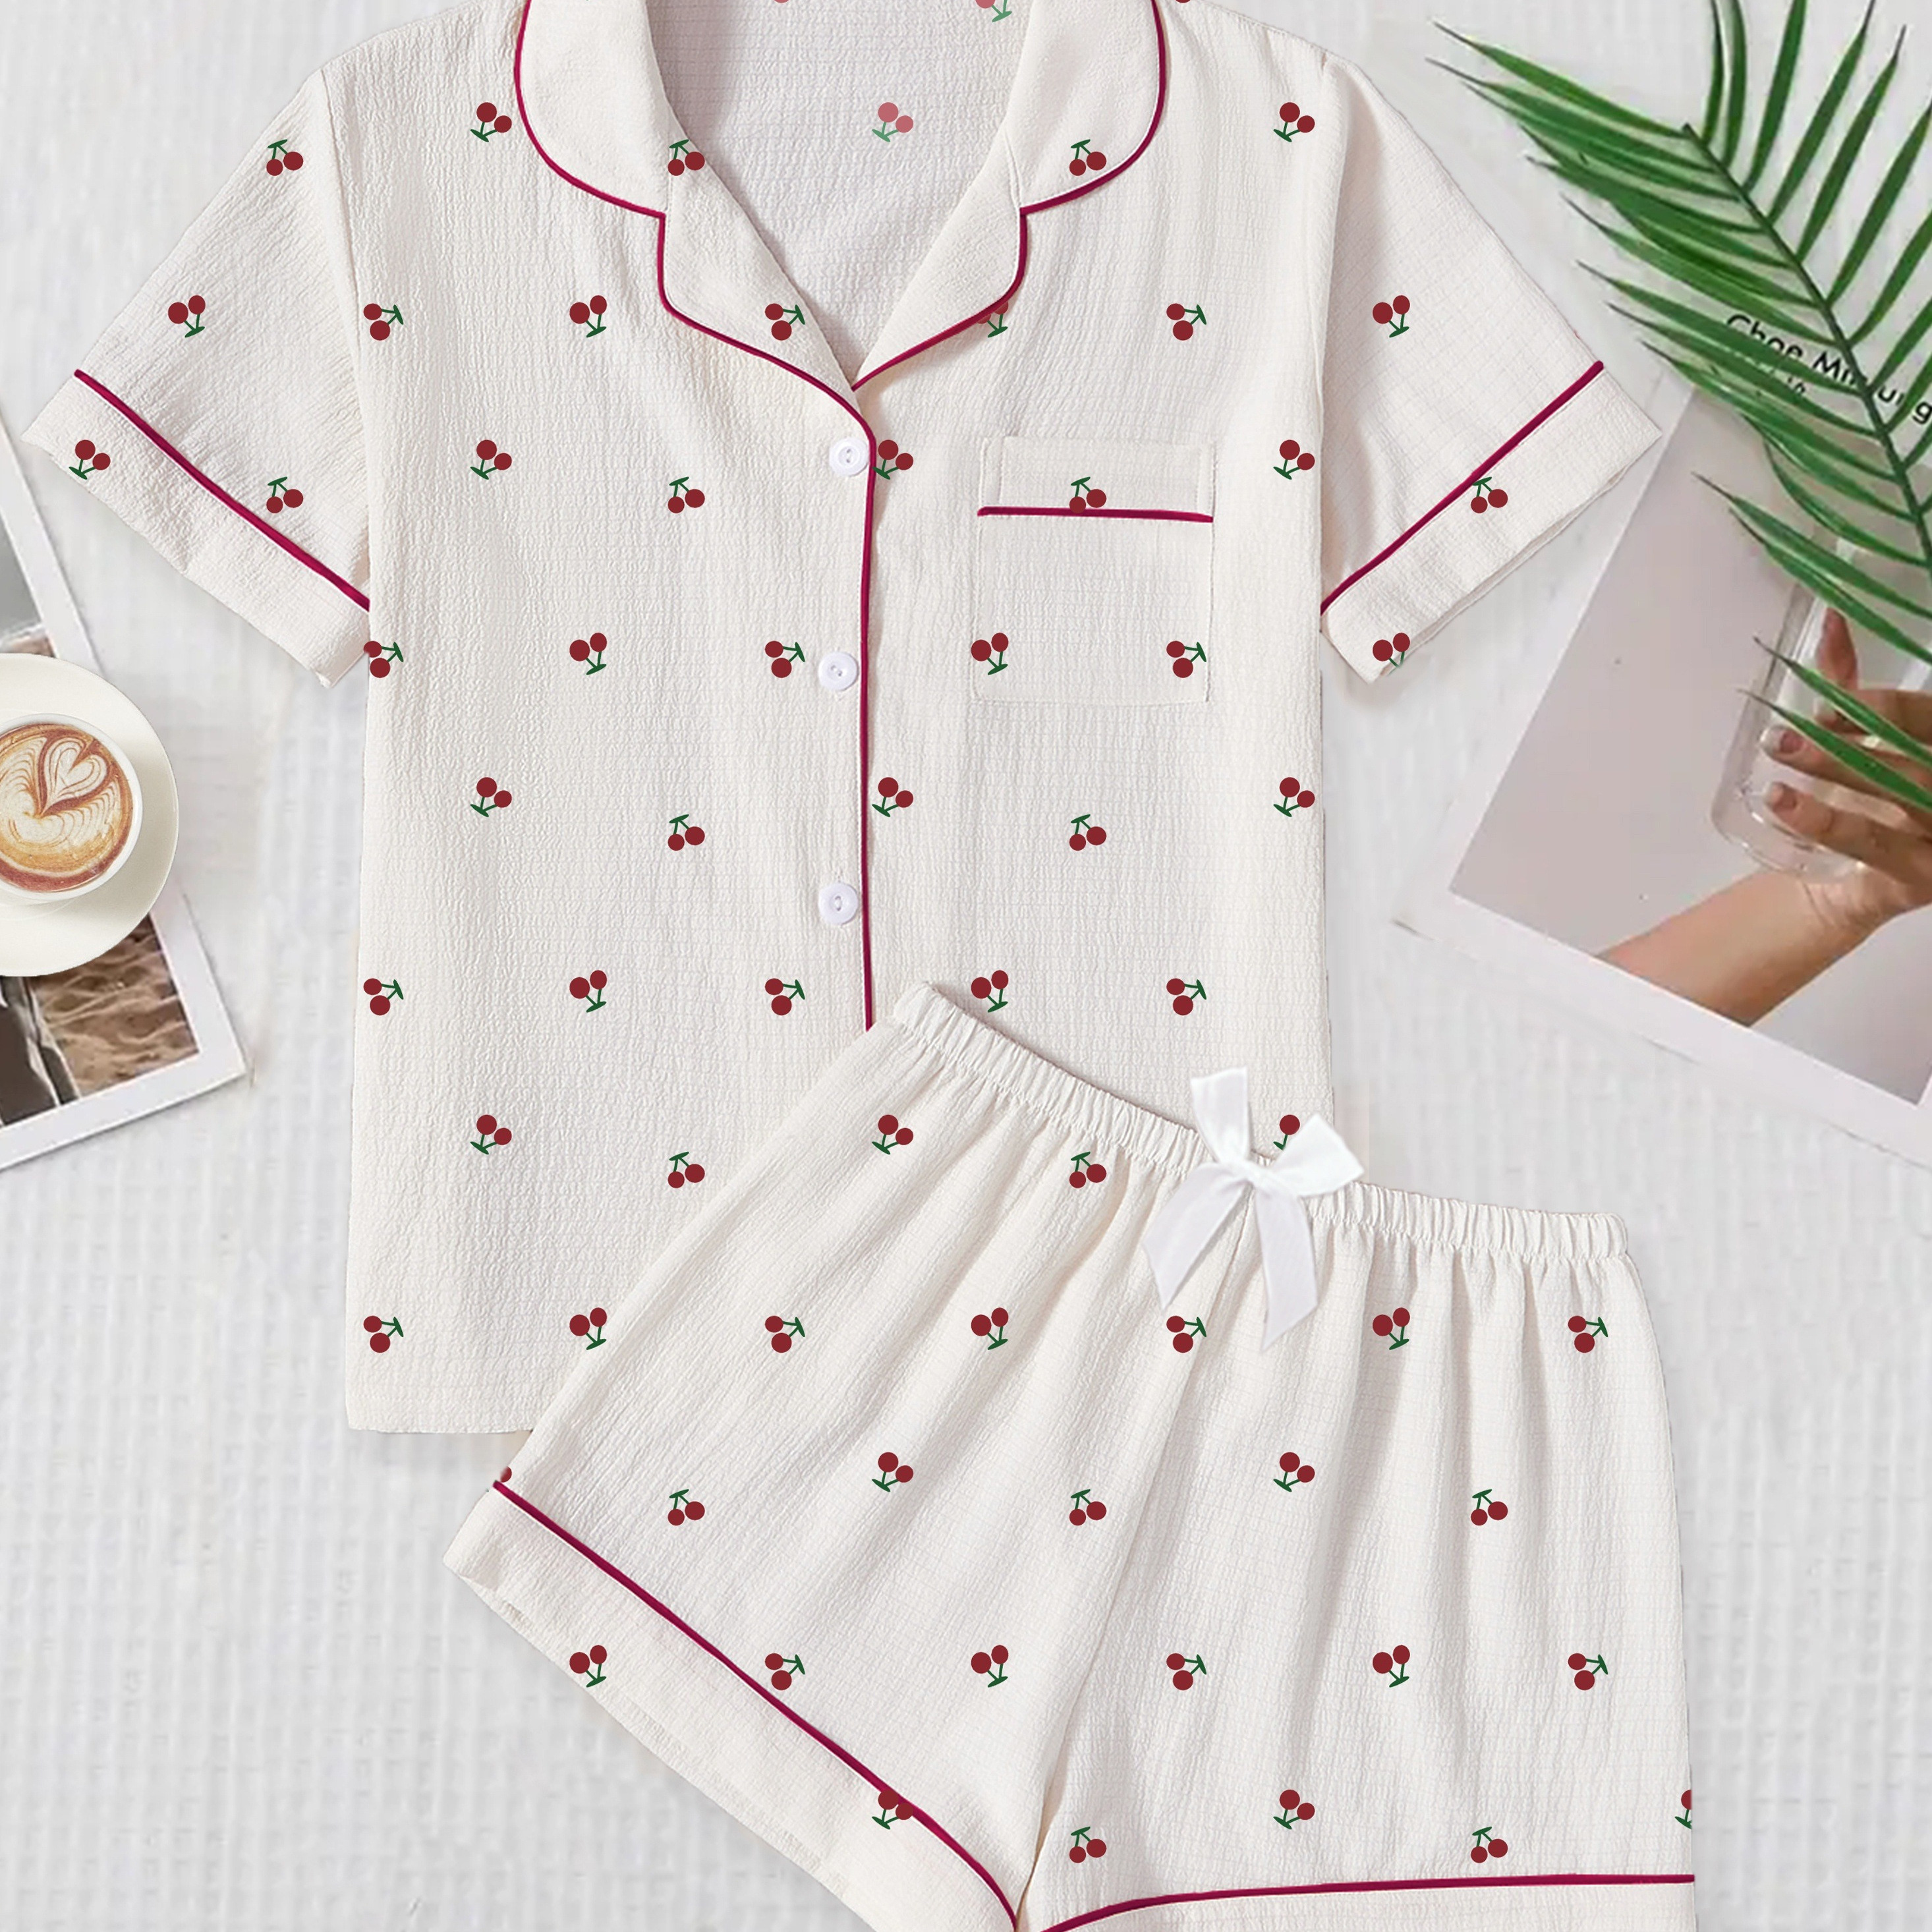 

Women's Cherry Print Textured Sweet Pajama Set, Short Sleeve Buttons Lapel Top & Shorts, Comfortable Relaxed Fit